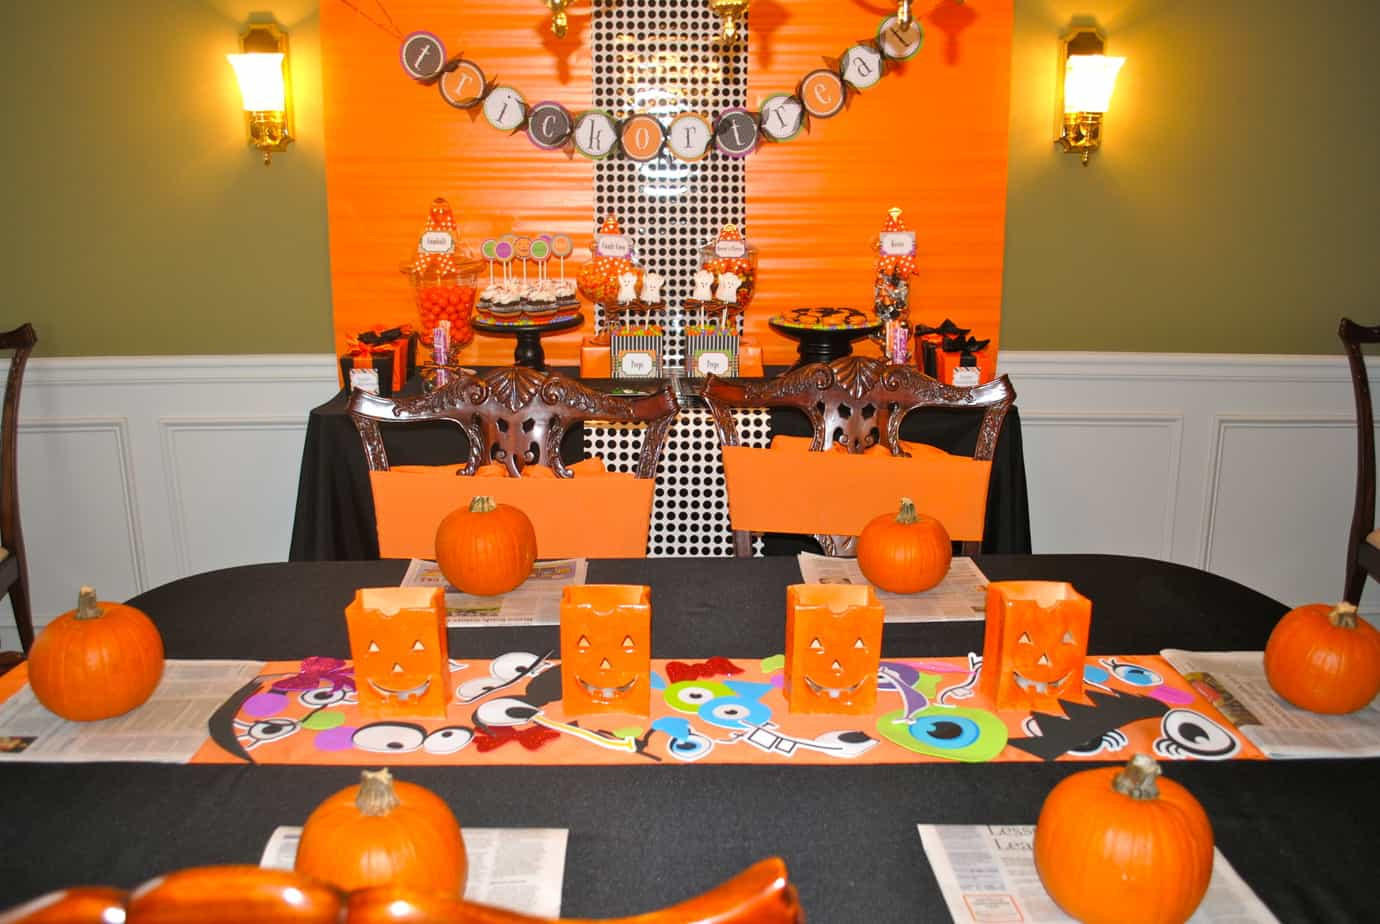 Fun Halloween Party Ideas For Adults
 Halloween Party Ideas For Kids 2019 With Daily